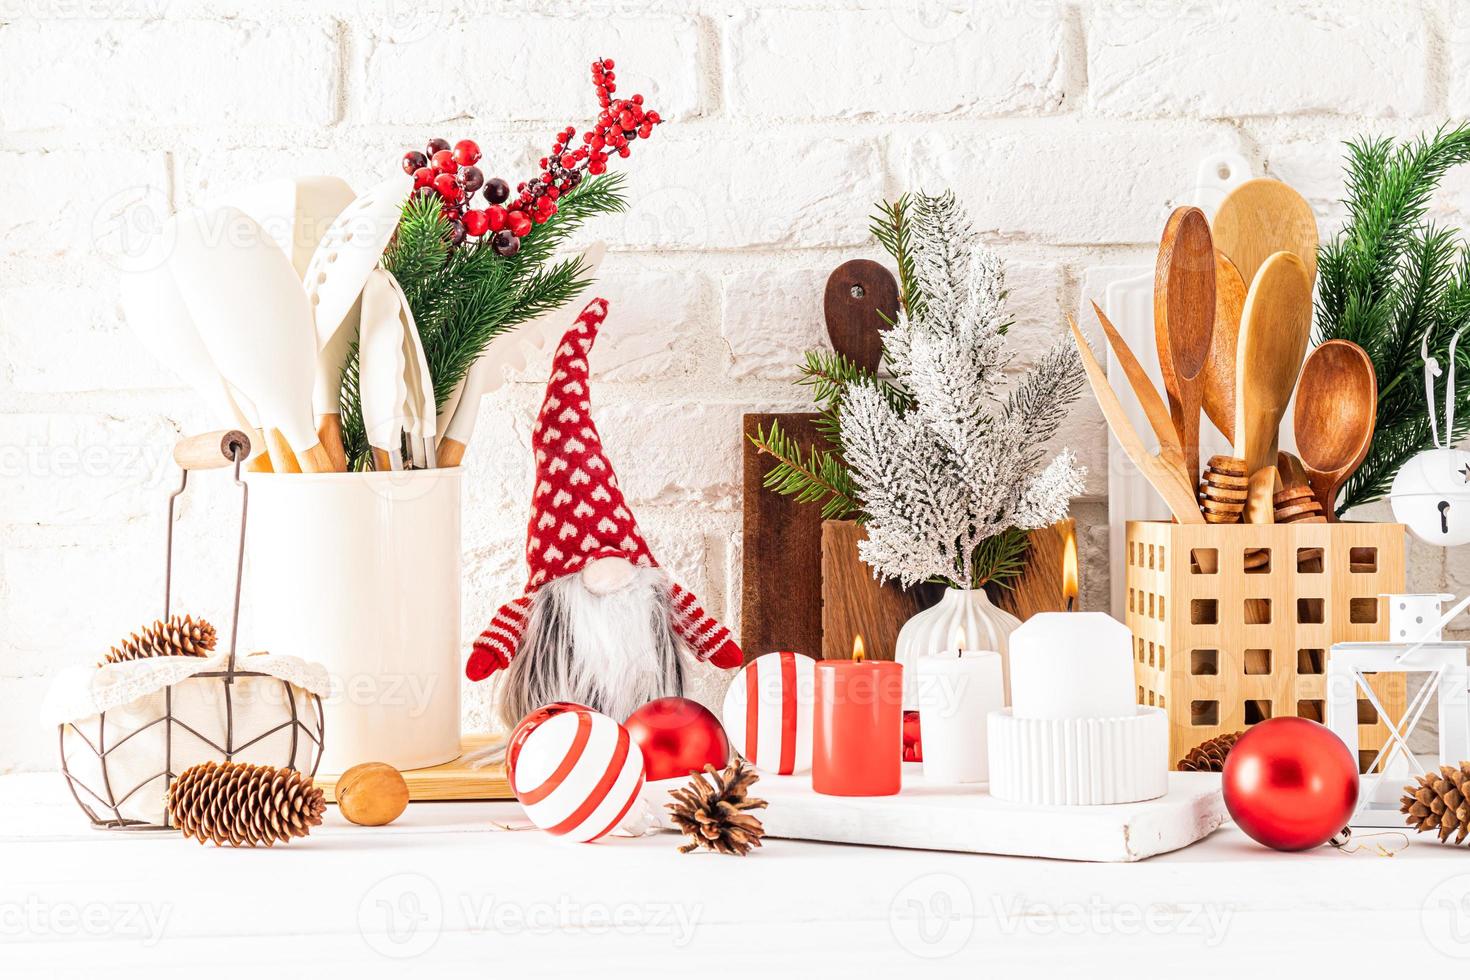 a fragment of a white wooden countertop with various kitchen utensils and Christmas decorations. candles, balls, branches of spruce. photo